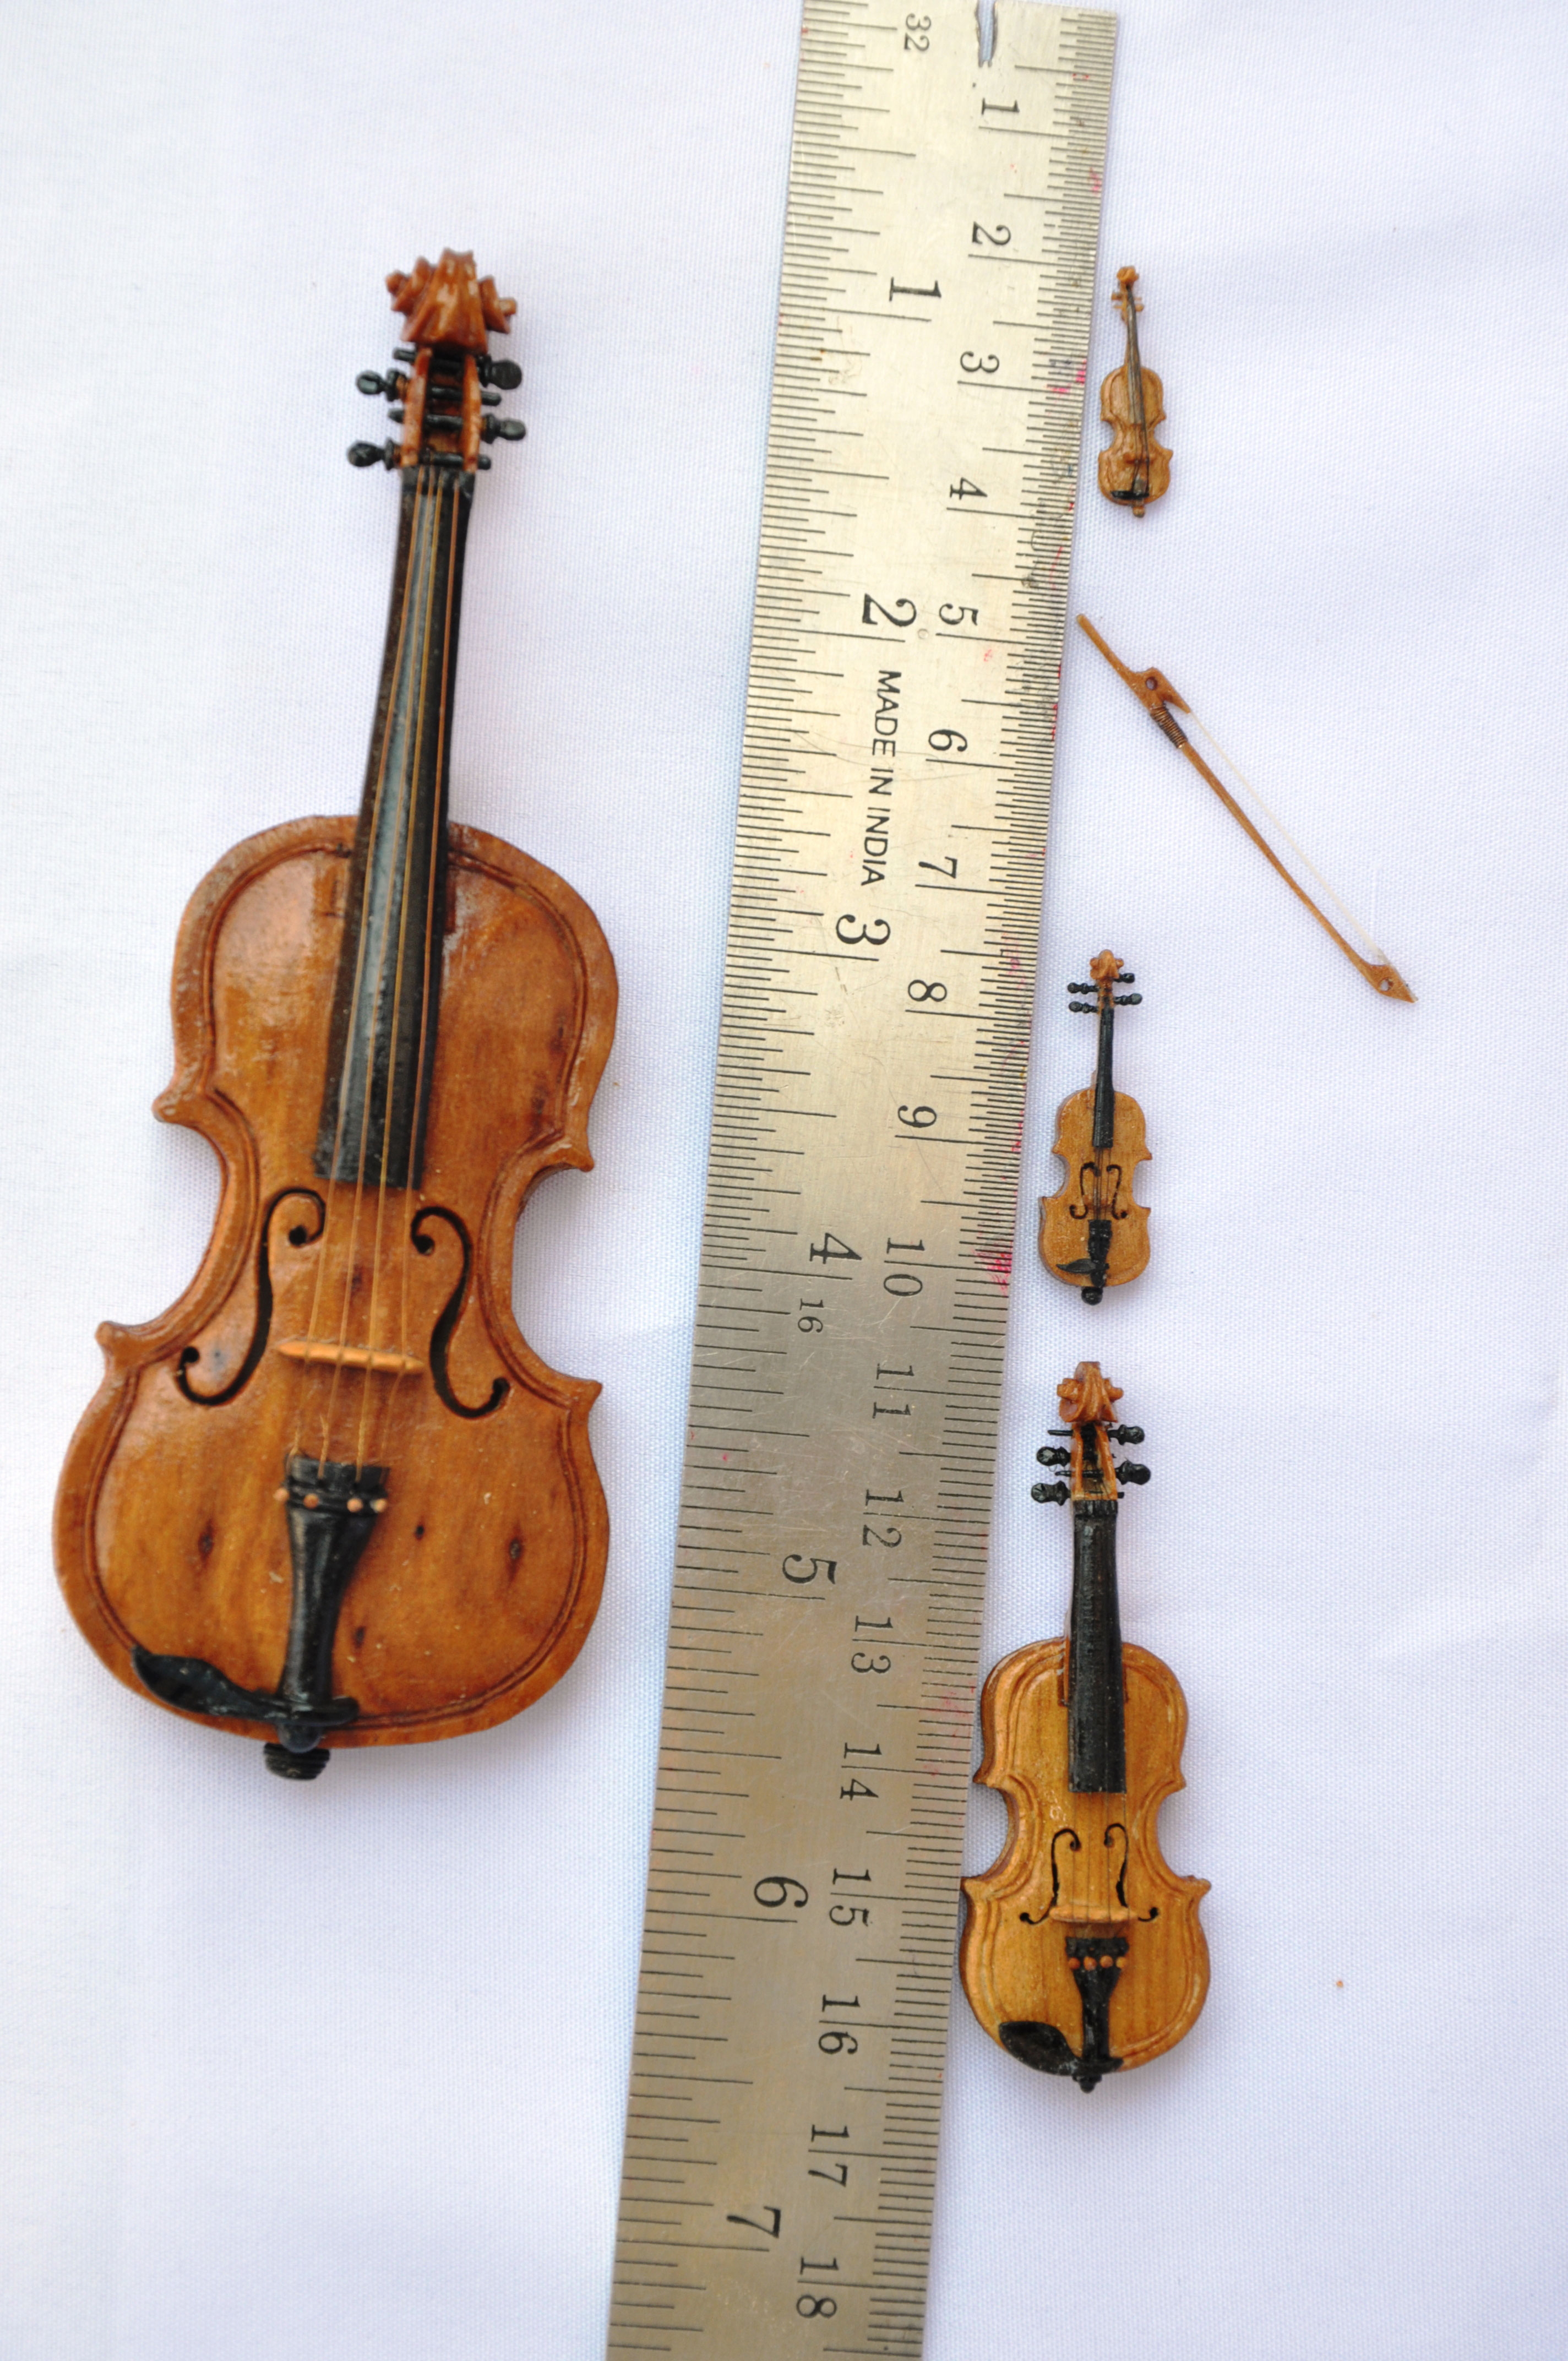 Smallest Playable Violin - India Book of Records